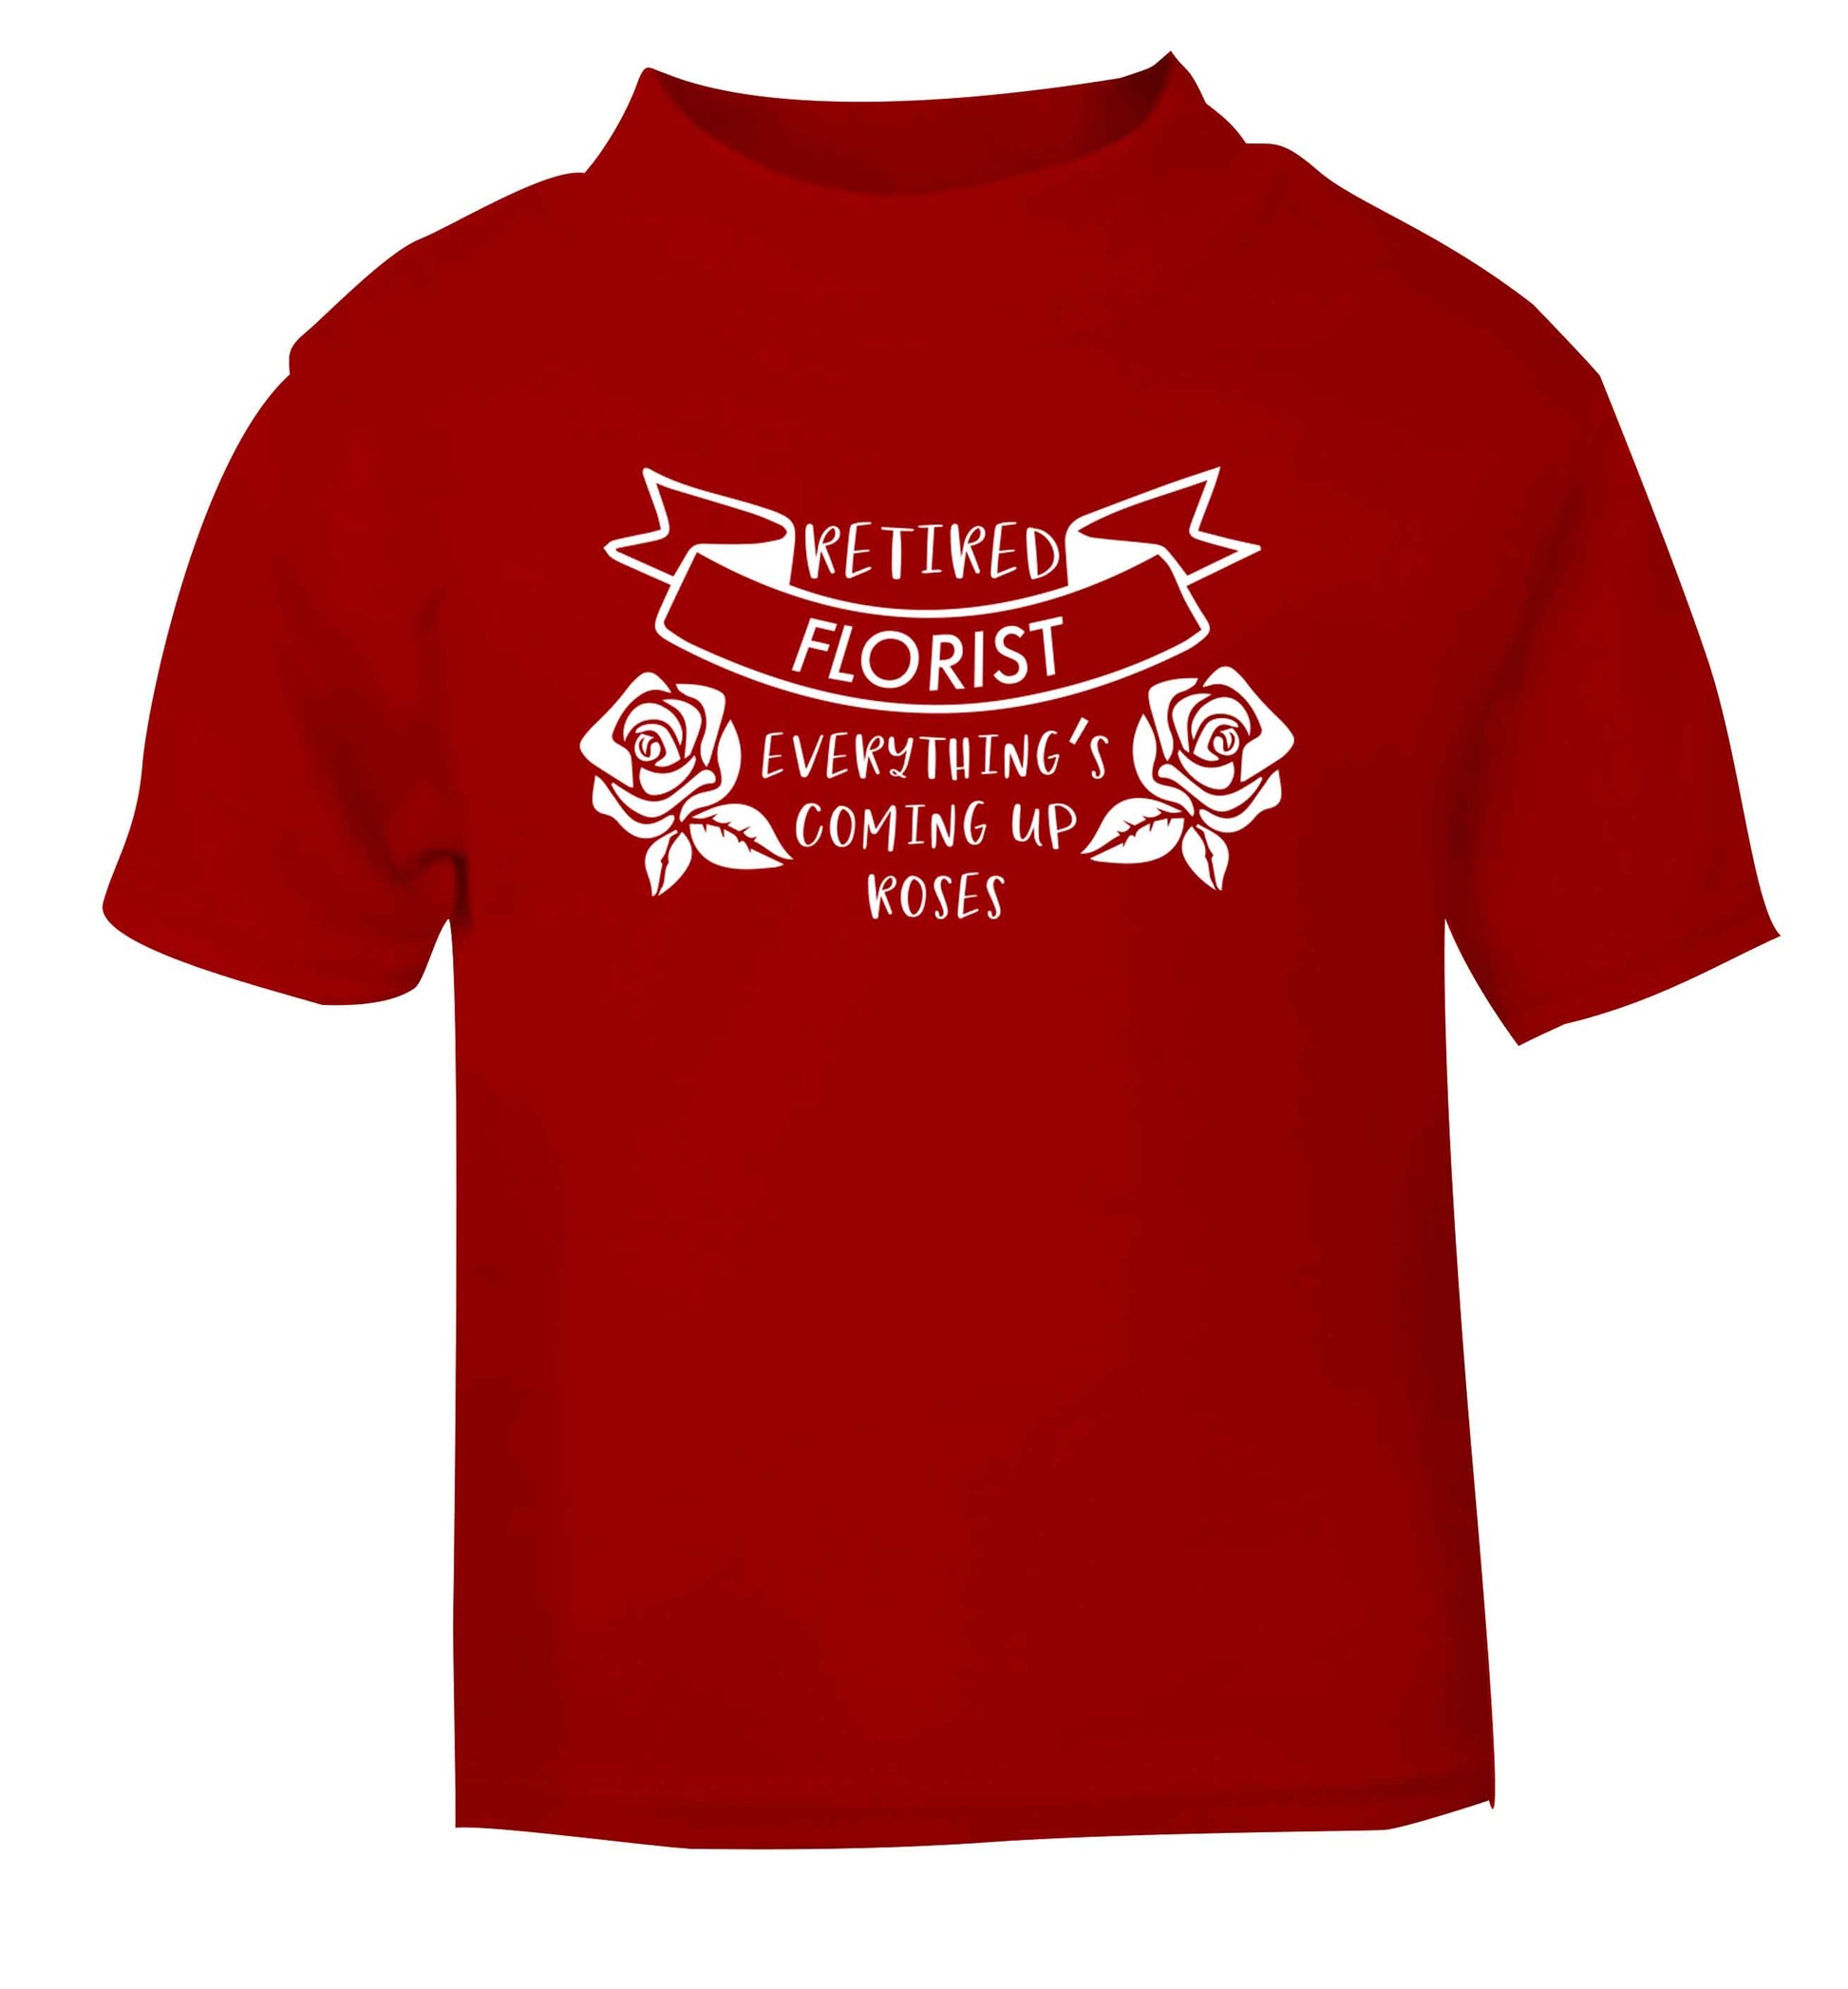 Retired florist everything's coming up roses red Baby Toddler Tshirt 2 Years